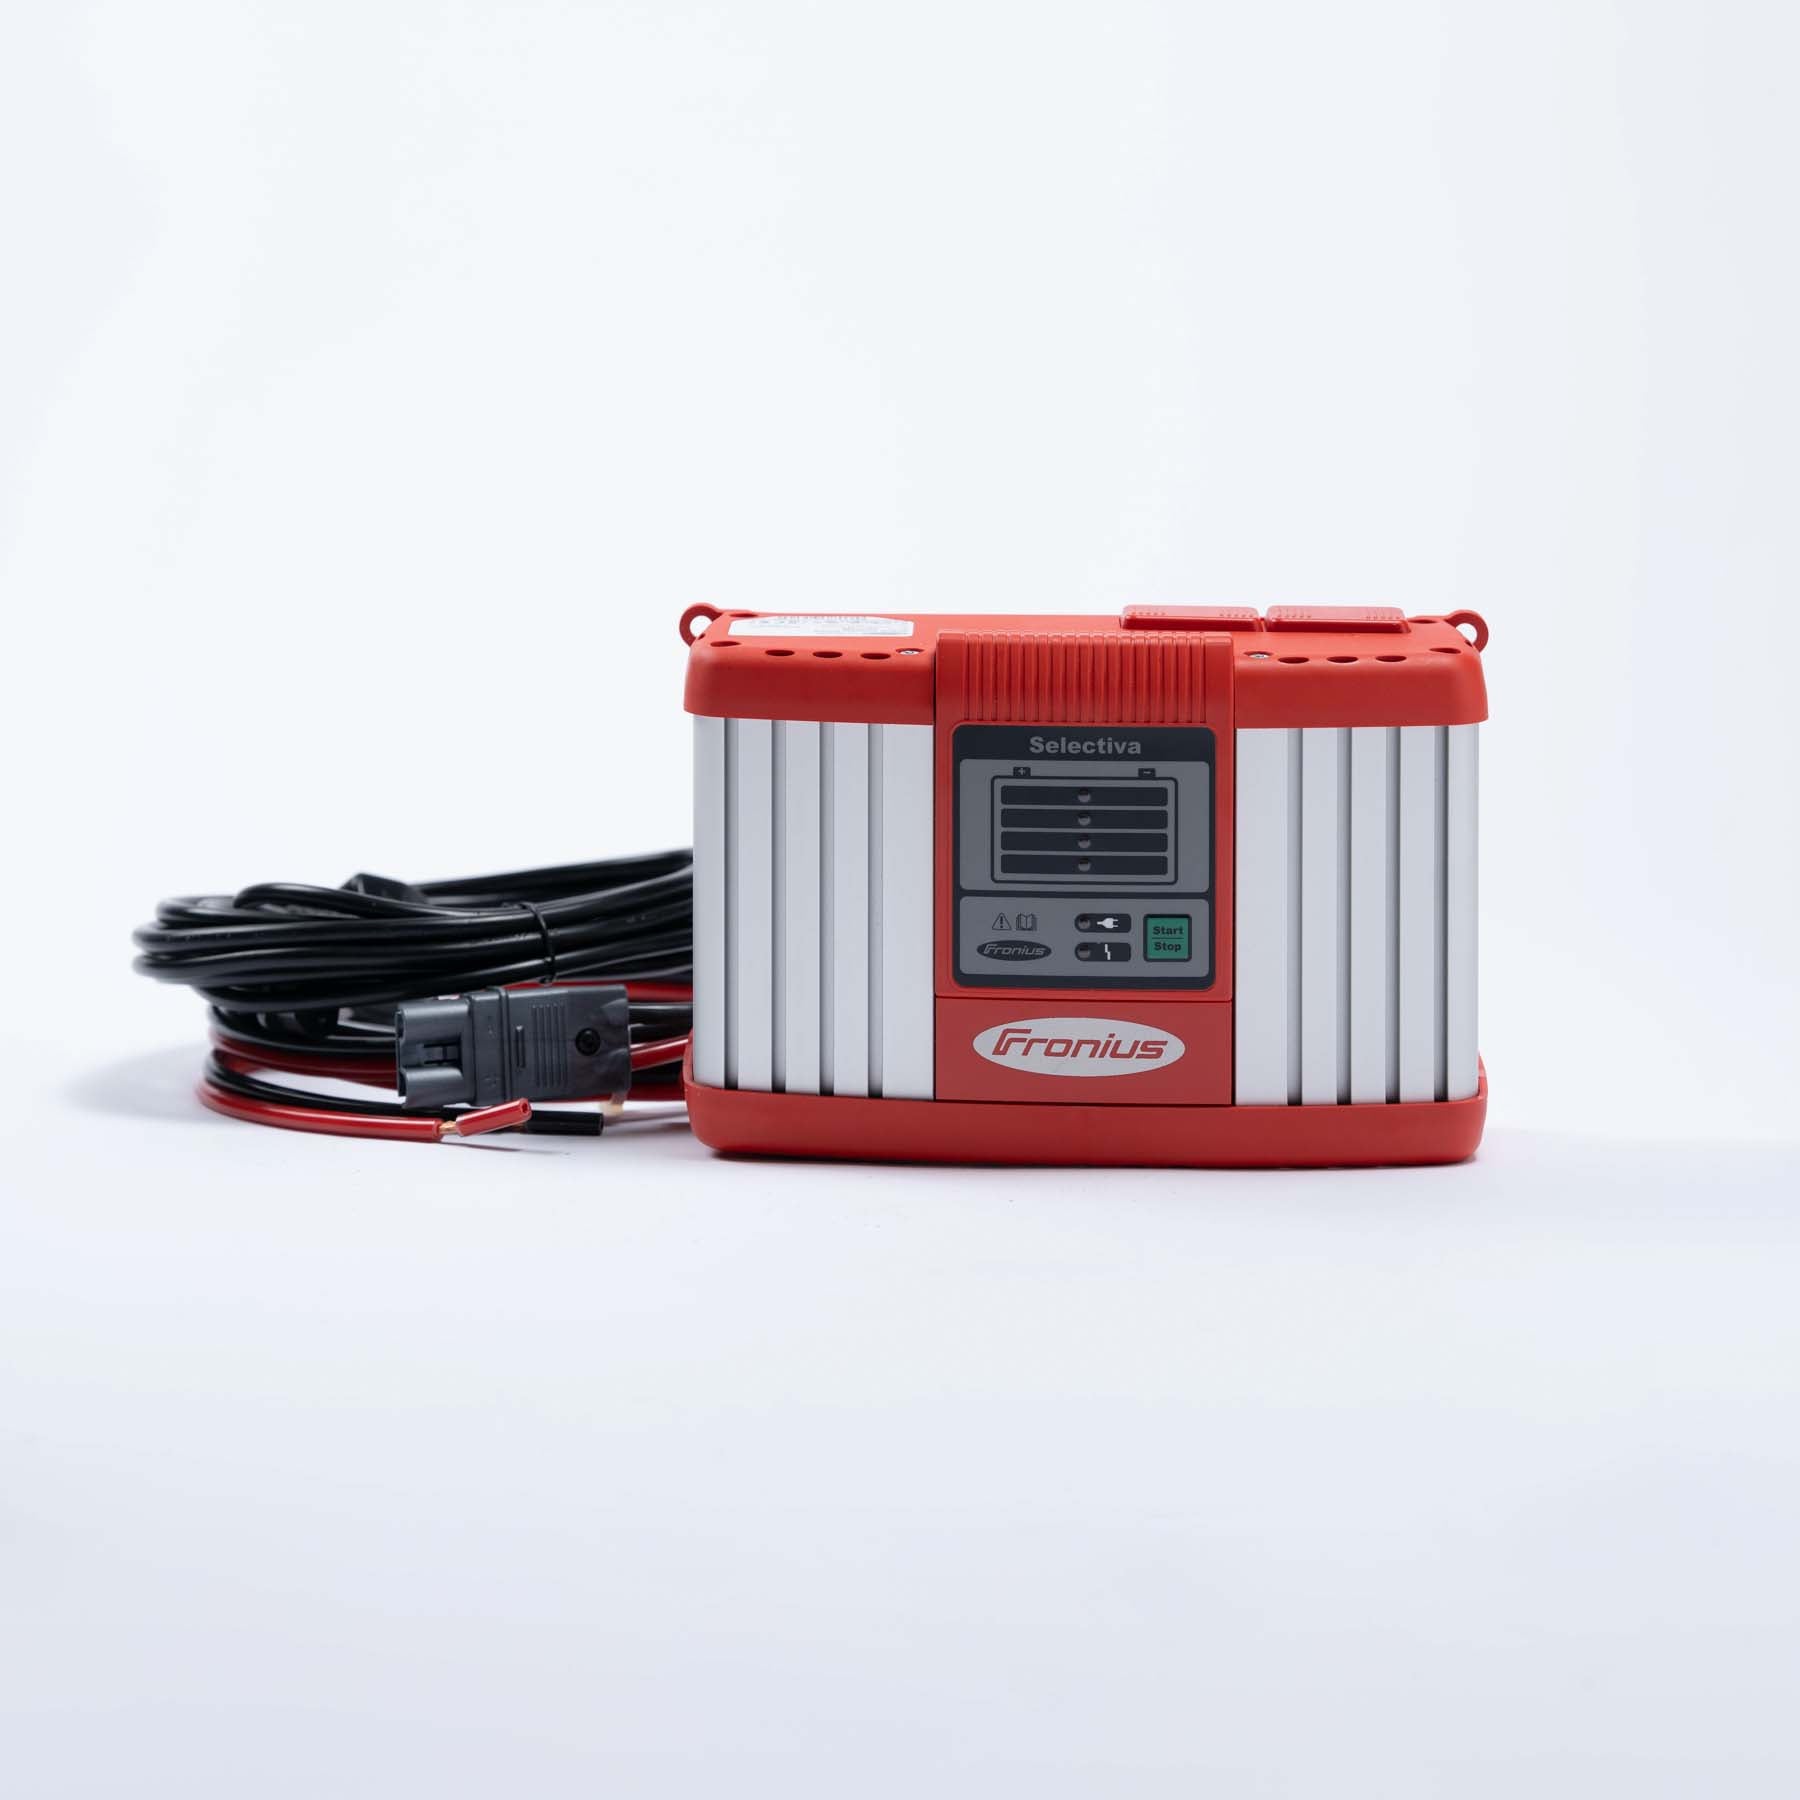 Fronius Selectiva Forklift Battery Charger